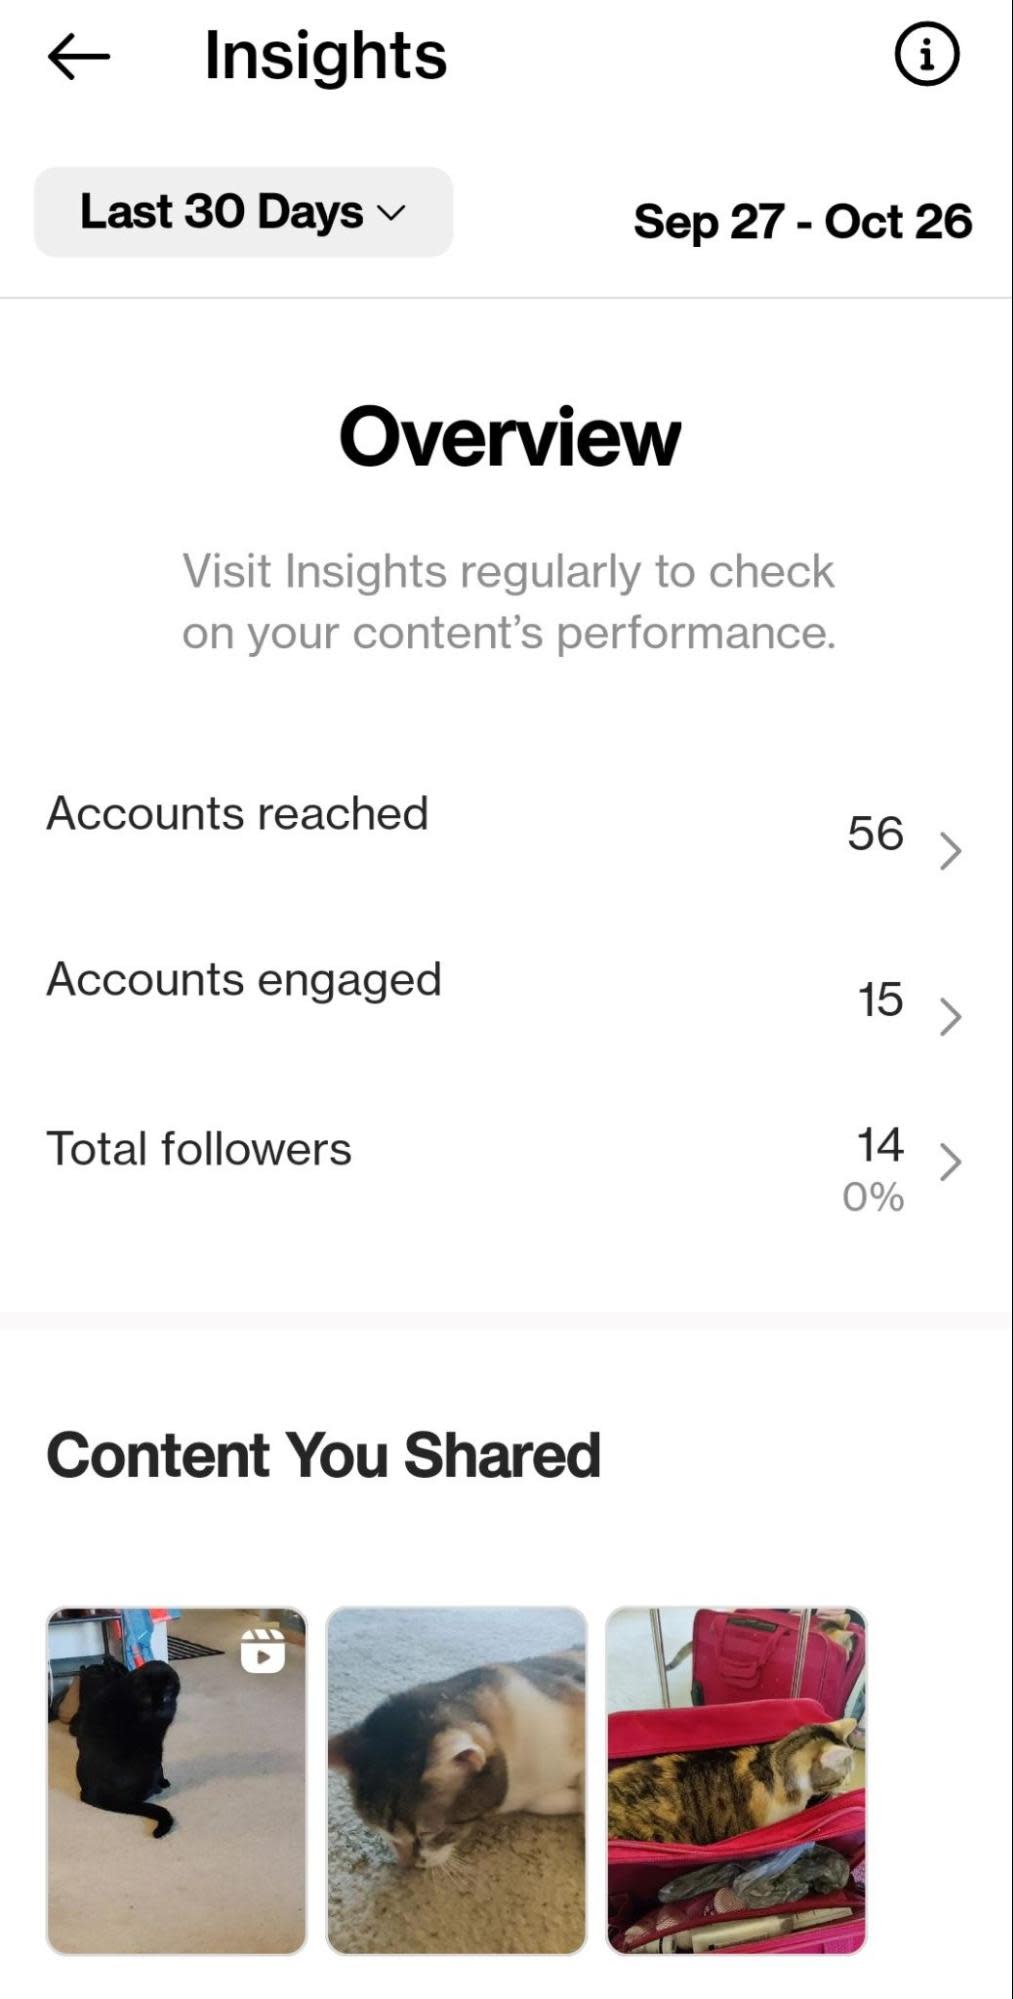 Insights overview page on Instagram